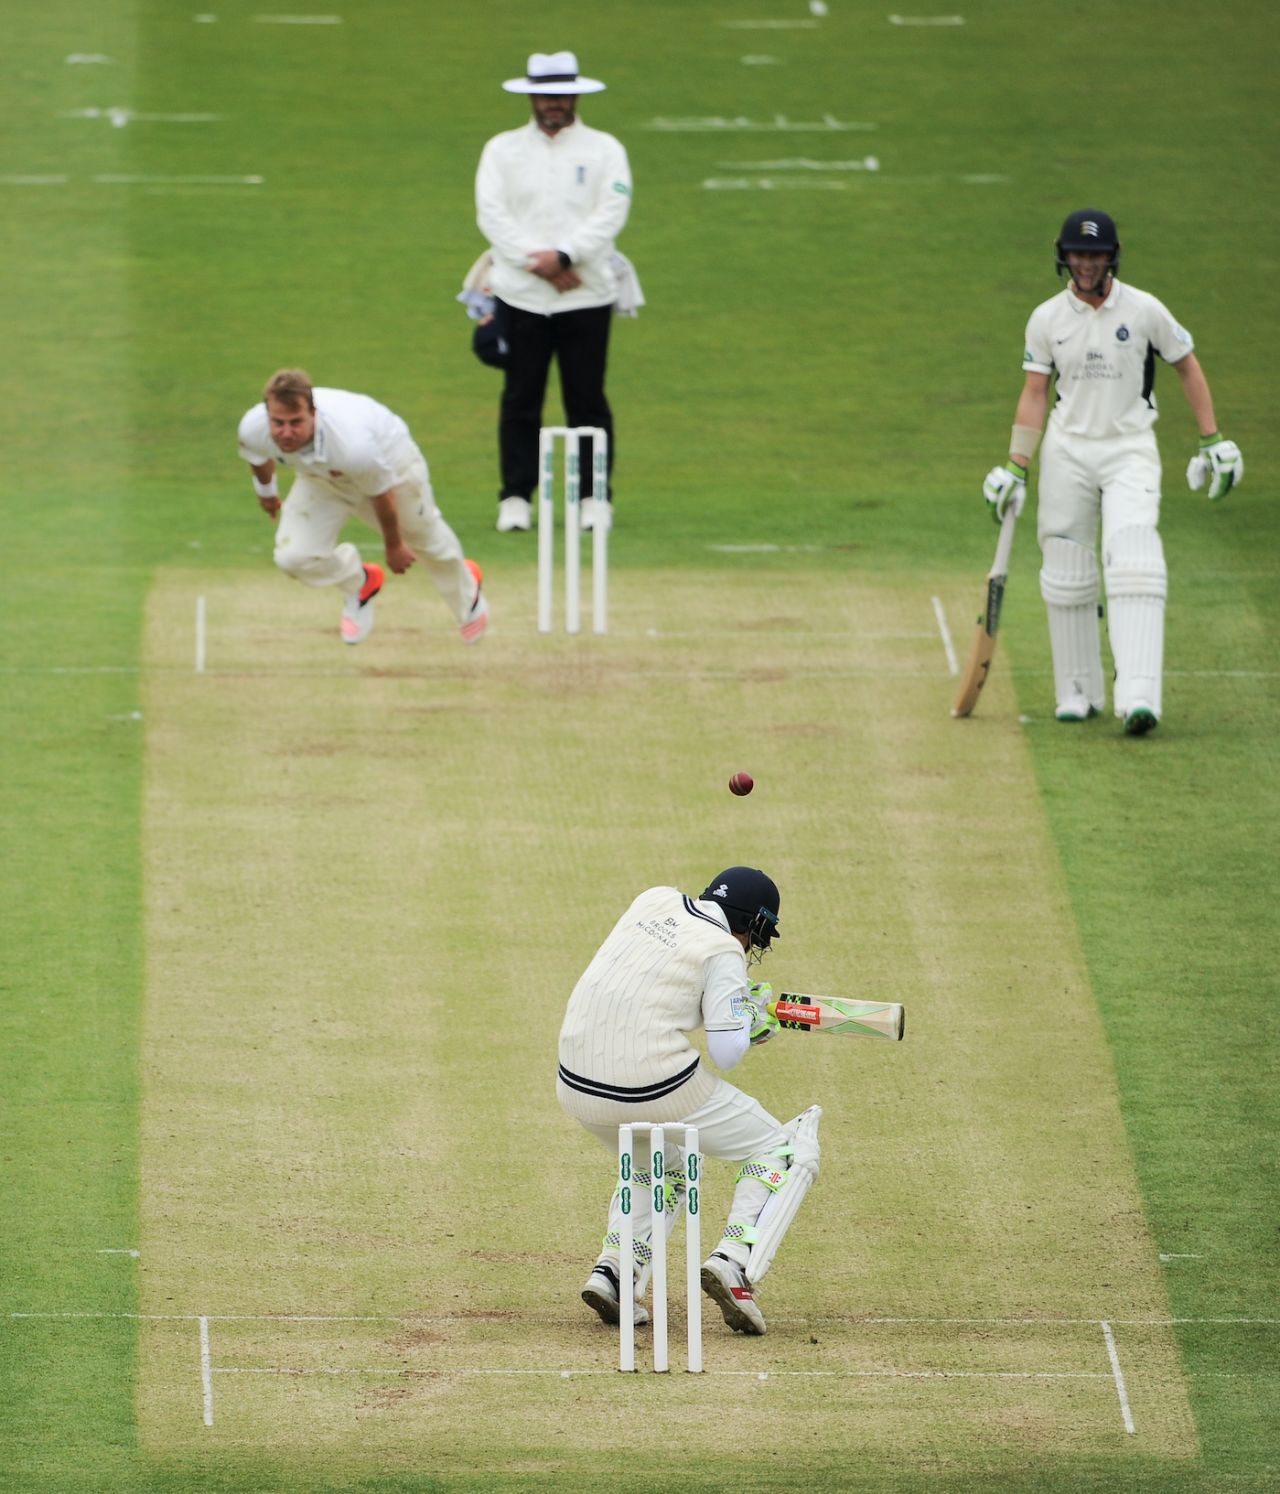 Sam Robson ducks under a bouncer from Neil Wagner, day one, Middlesex v Essex, Specsavers County Championship, Division One, Lord's, April 21, 2017